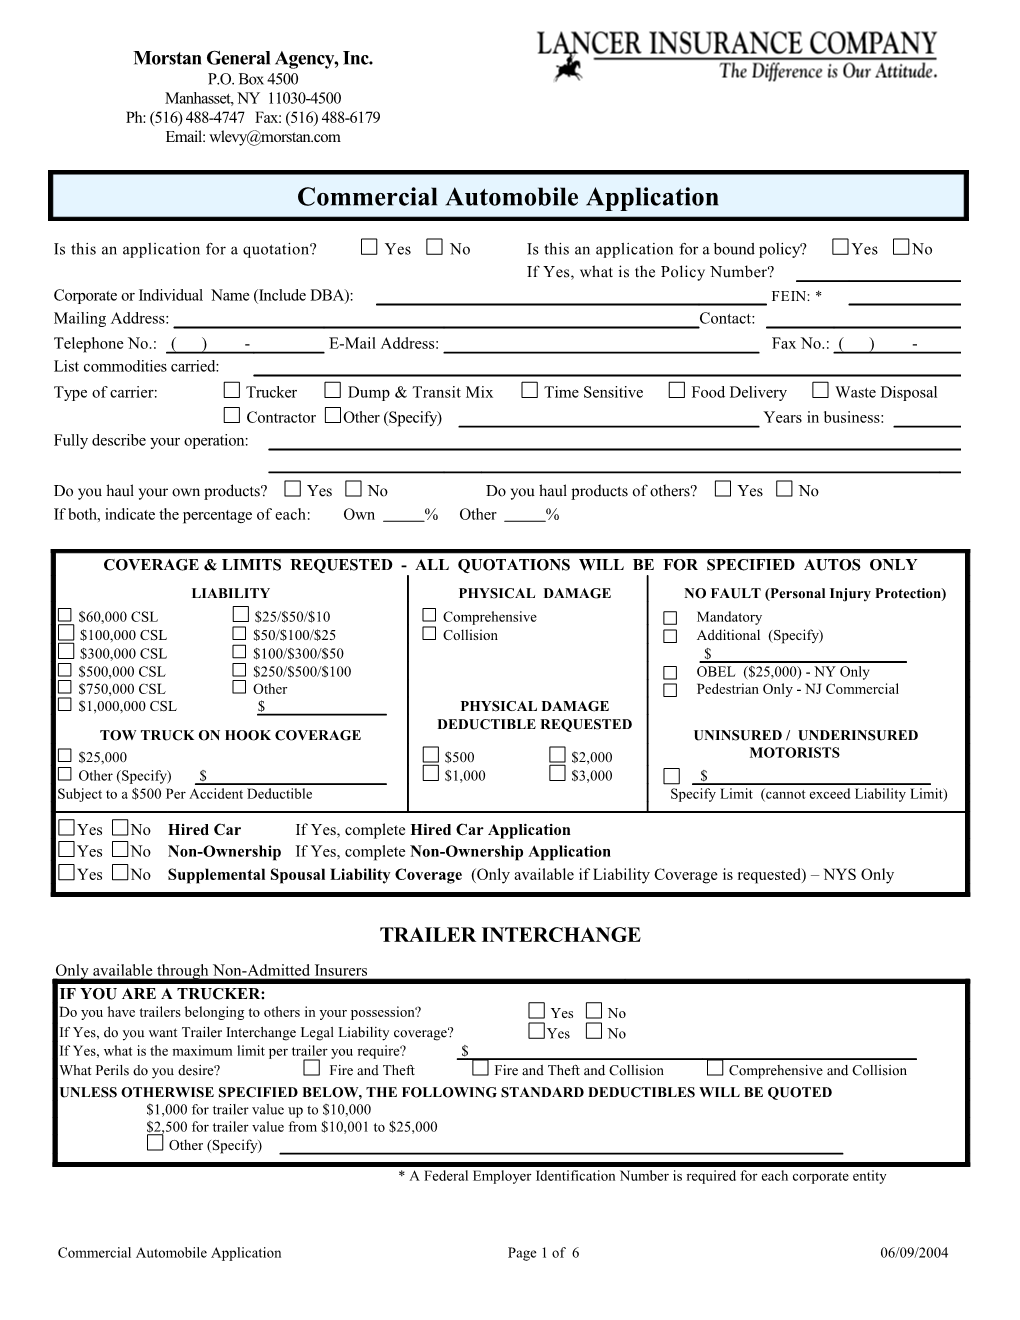 Commercial Automobile Applicationpage 1 of 5 06/09/2004